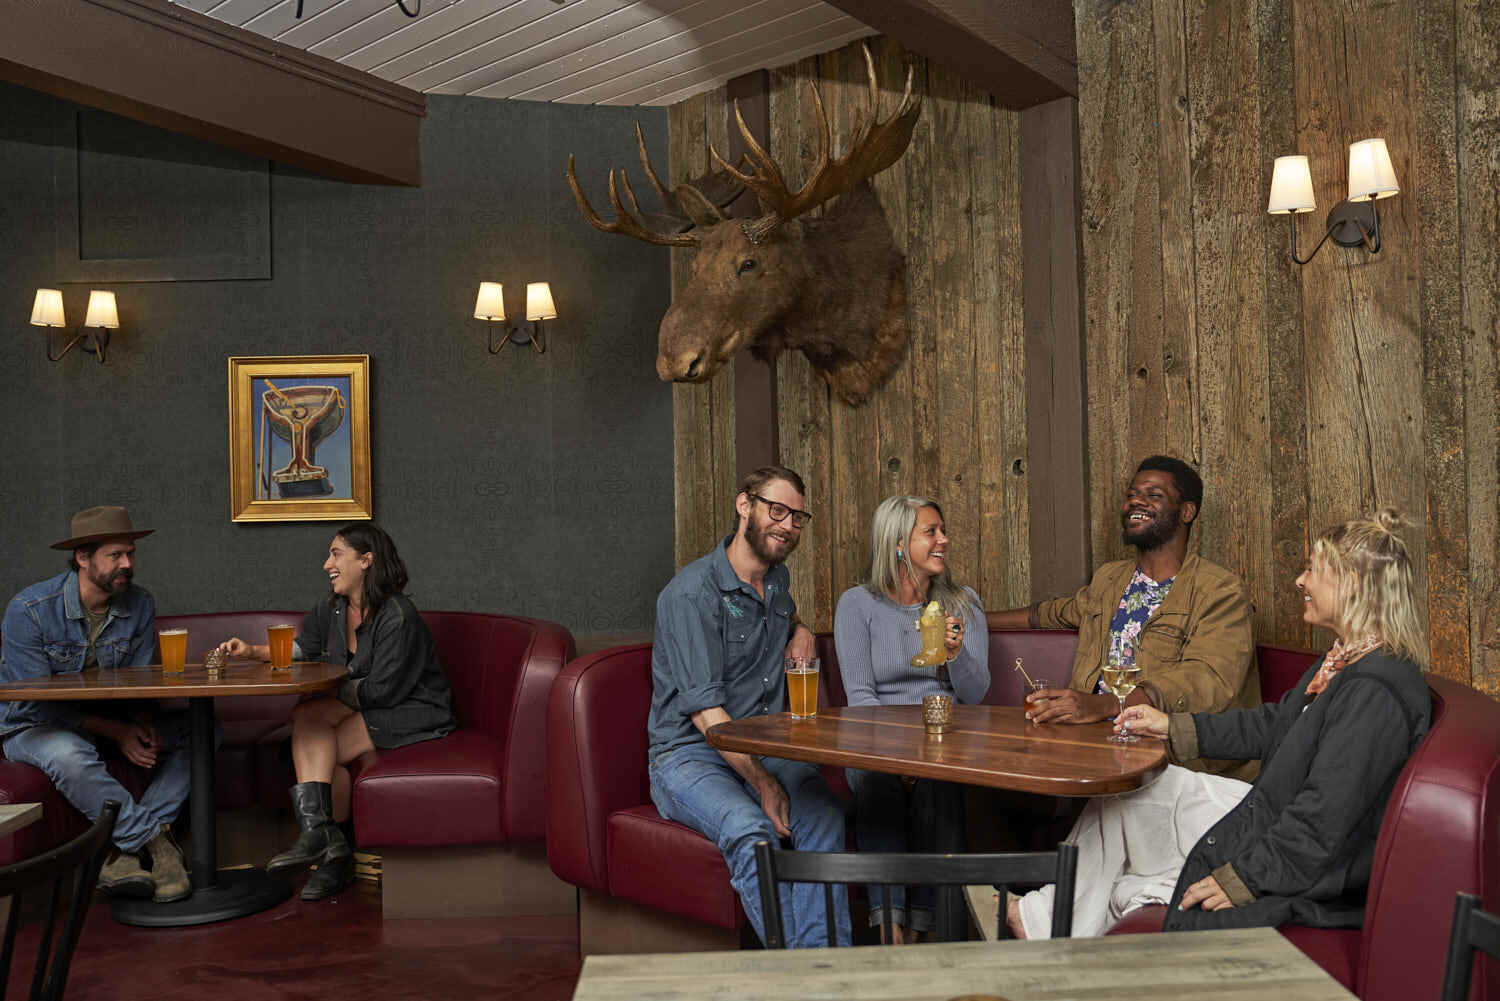 Cozy sofas host people enjoying drinks, complemented by a handcrafted Moose head on the wall.